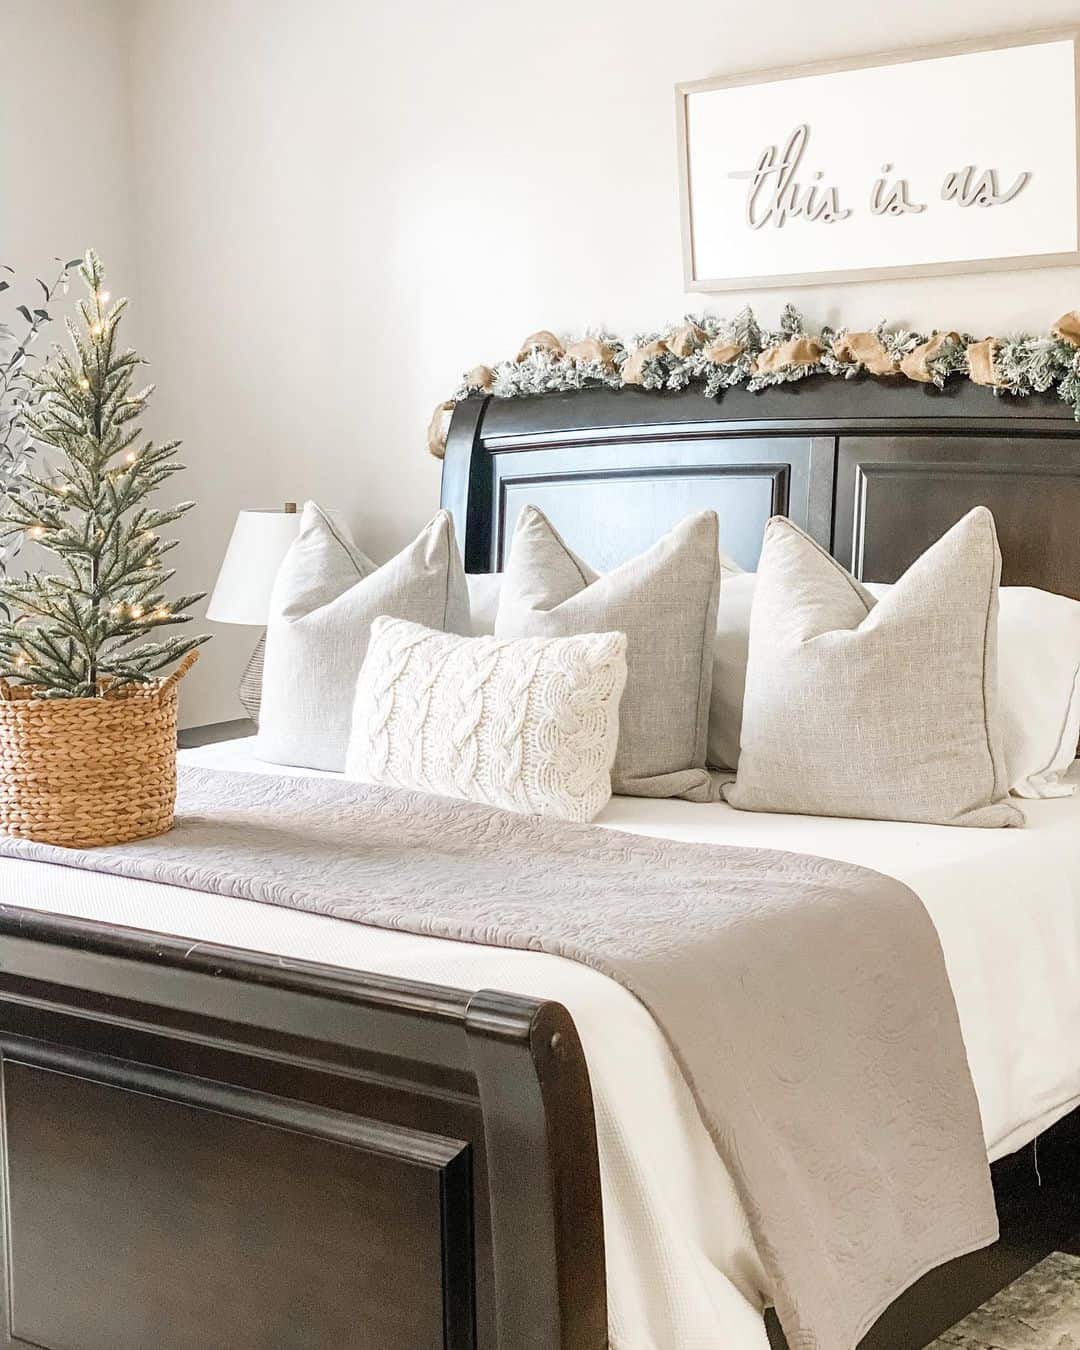 White Bedspread with Potted Christmas Tree - Soul & Lane